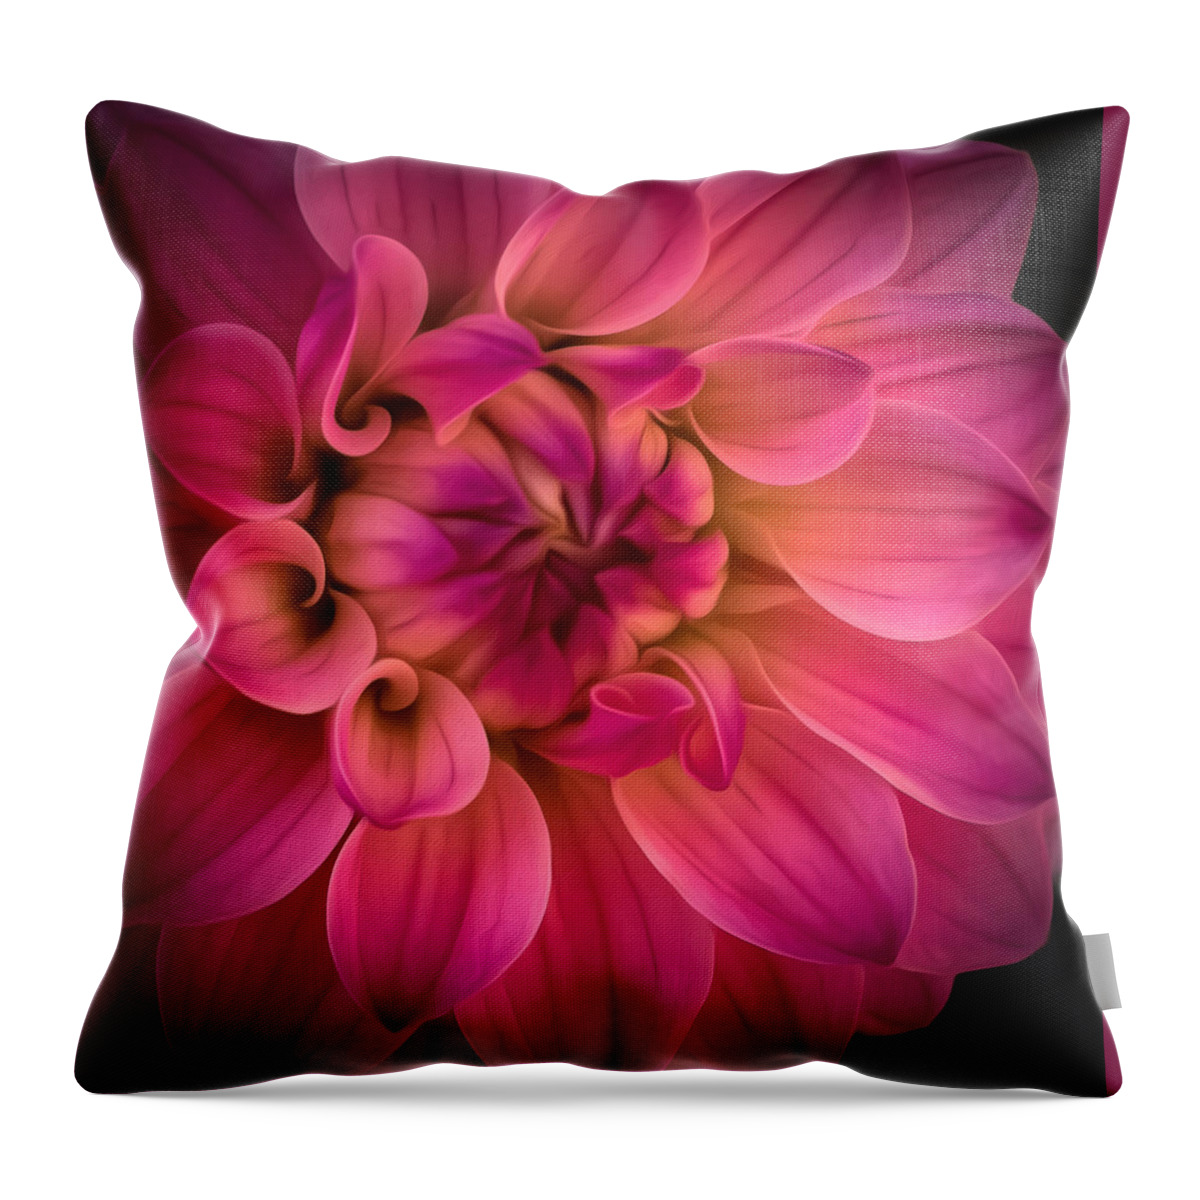 Dahlia Throw Pillow featuring the photograph Pink Dahlia by Linda Villers